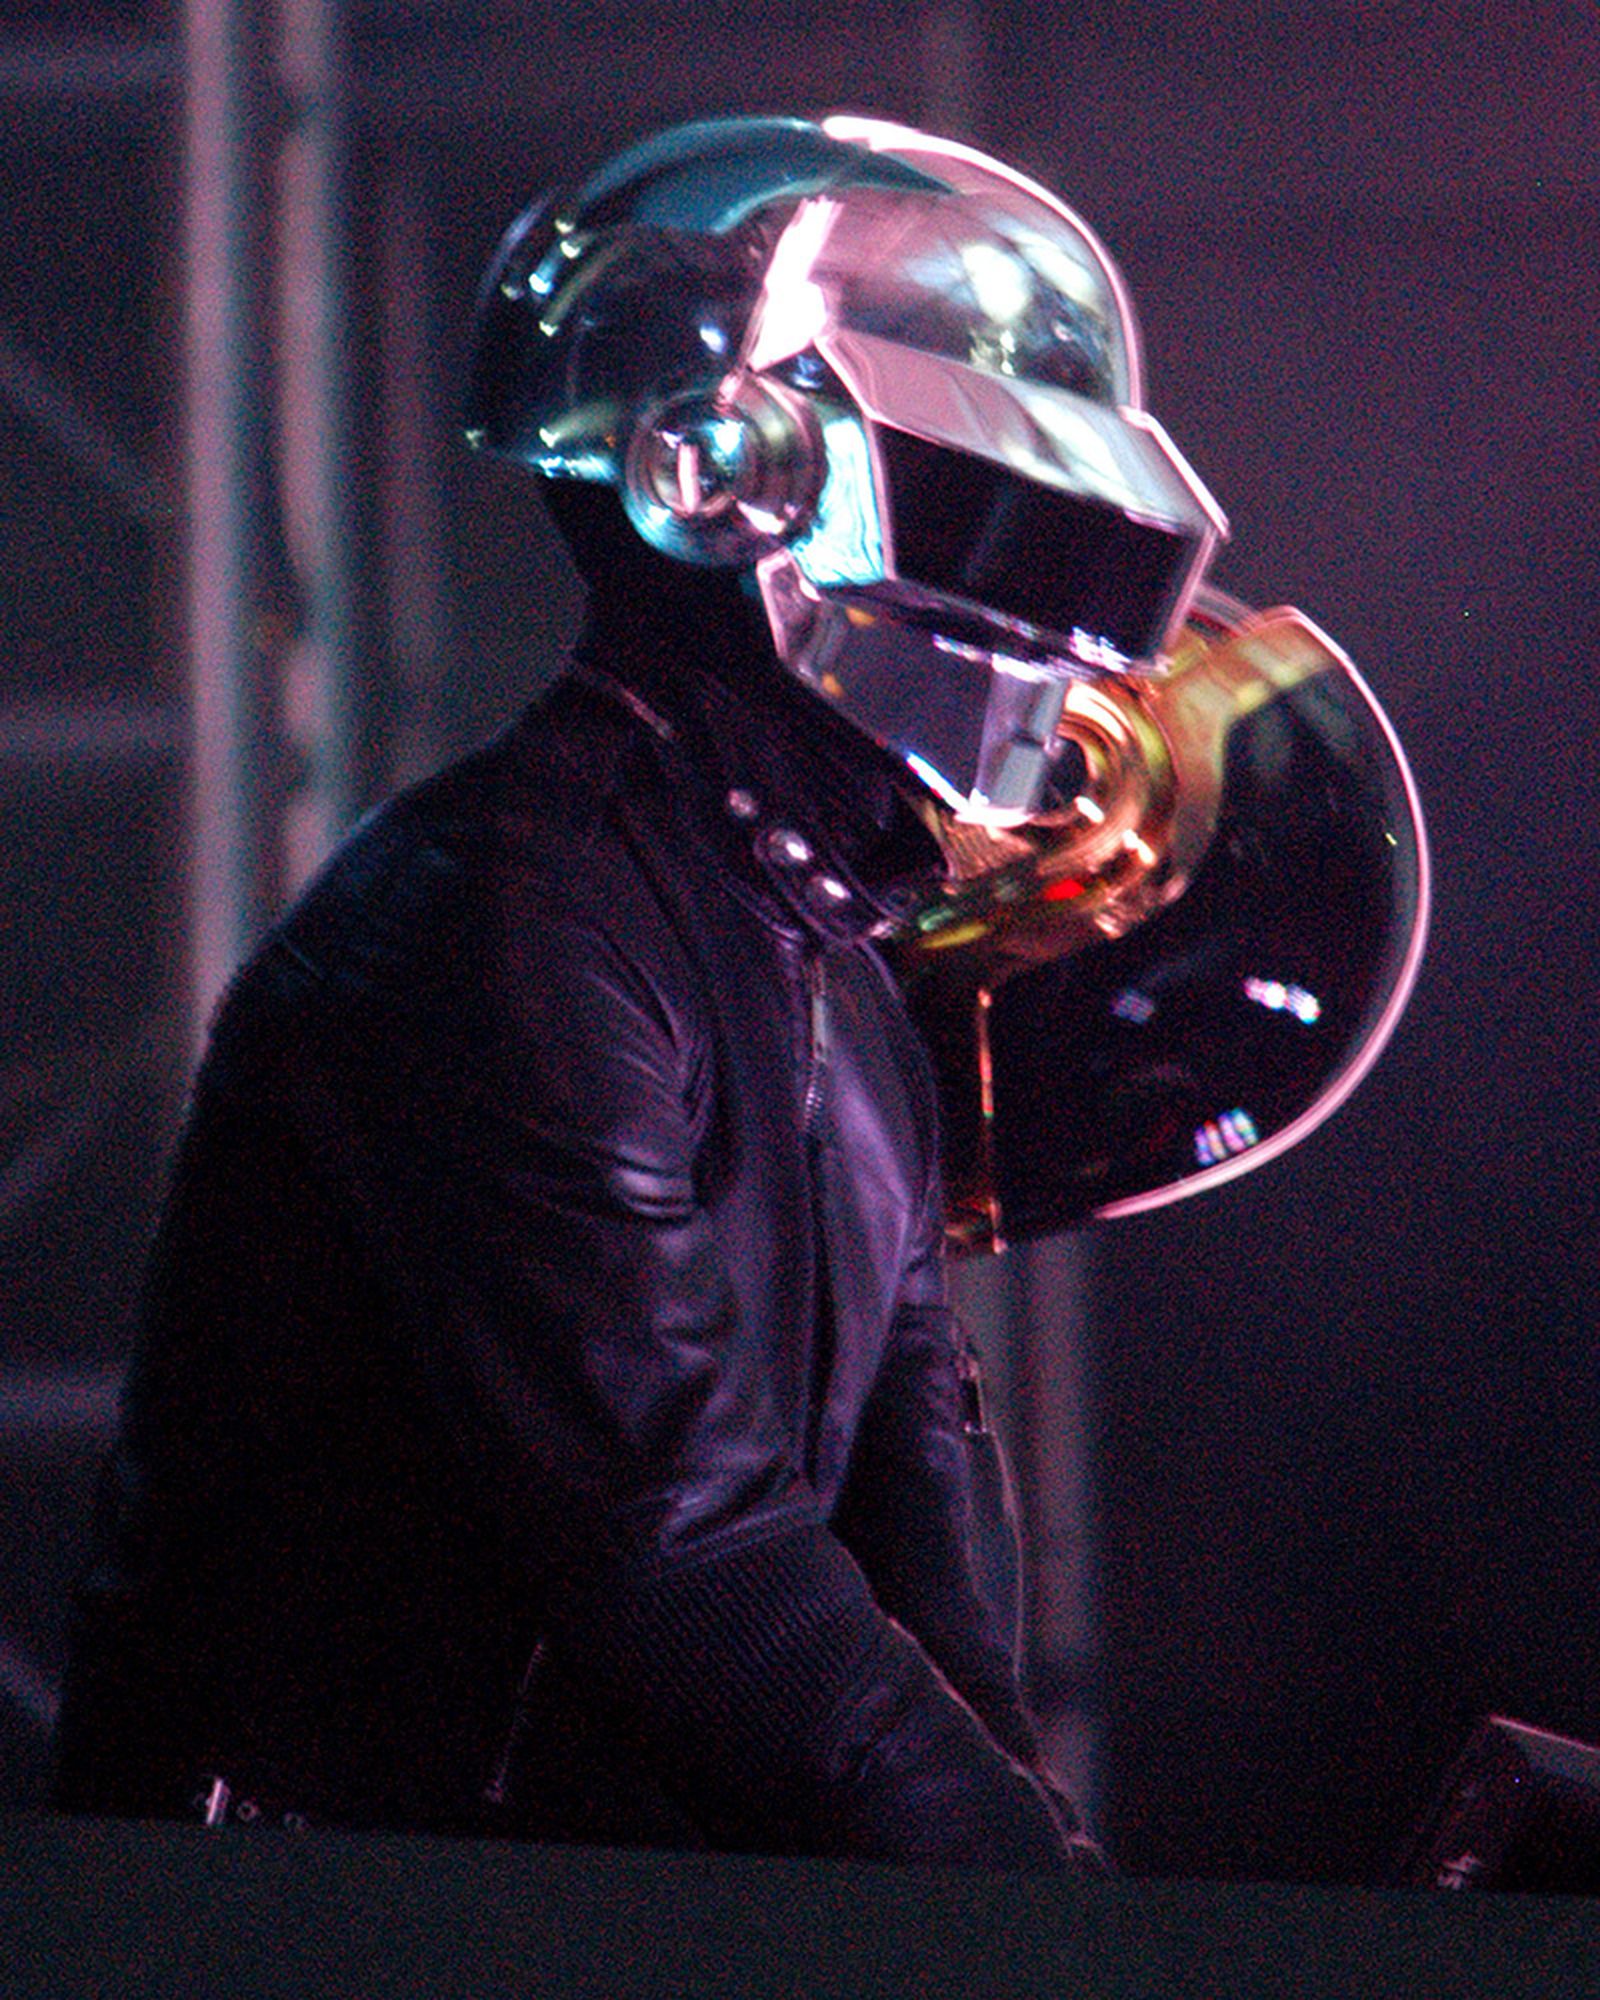 remembering-10-years-of-daft-punk-through-the-eyes-of-a-superfan-03